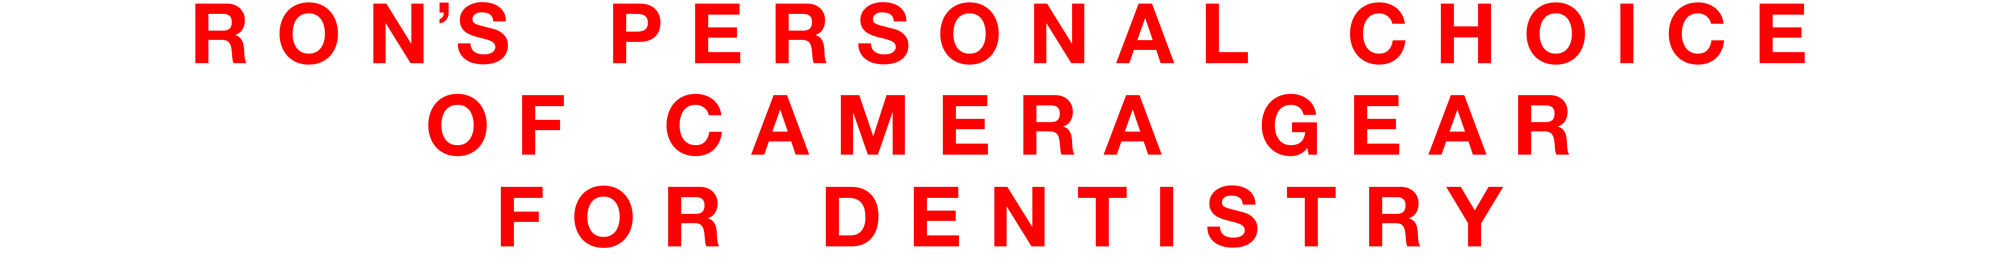 Rons-Personal-Choice-of-Camera-Equipment-for-Dentistryron winter of fabulous teeth @ seaside dental laboratory & clinic Takapuna Auckland New Zealand.jpg